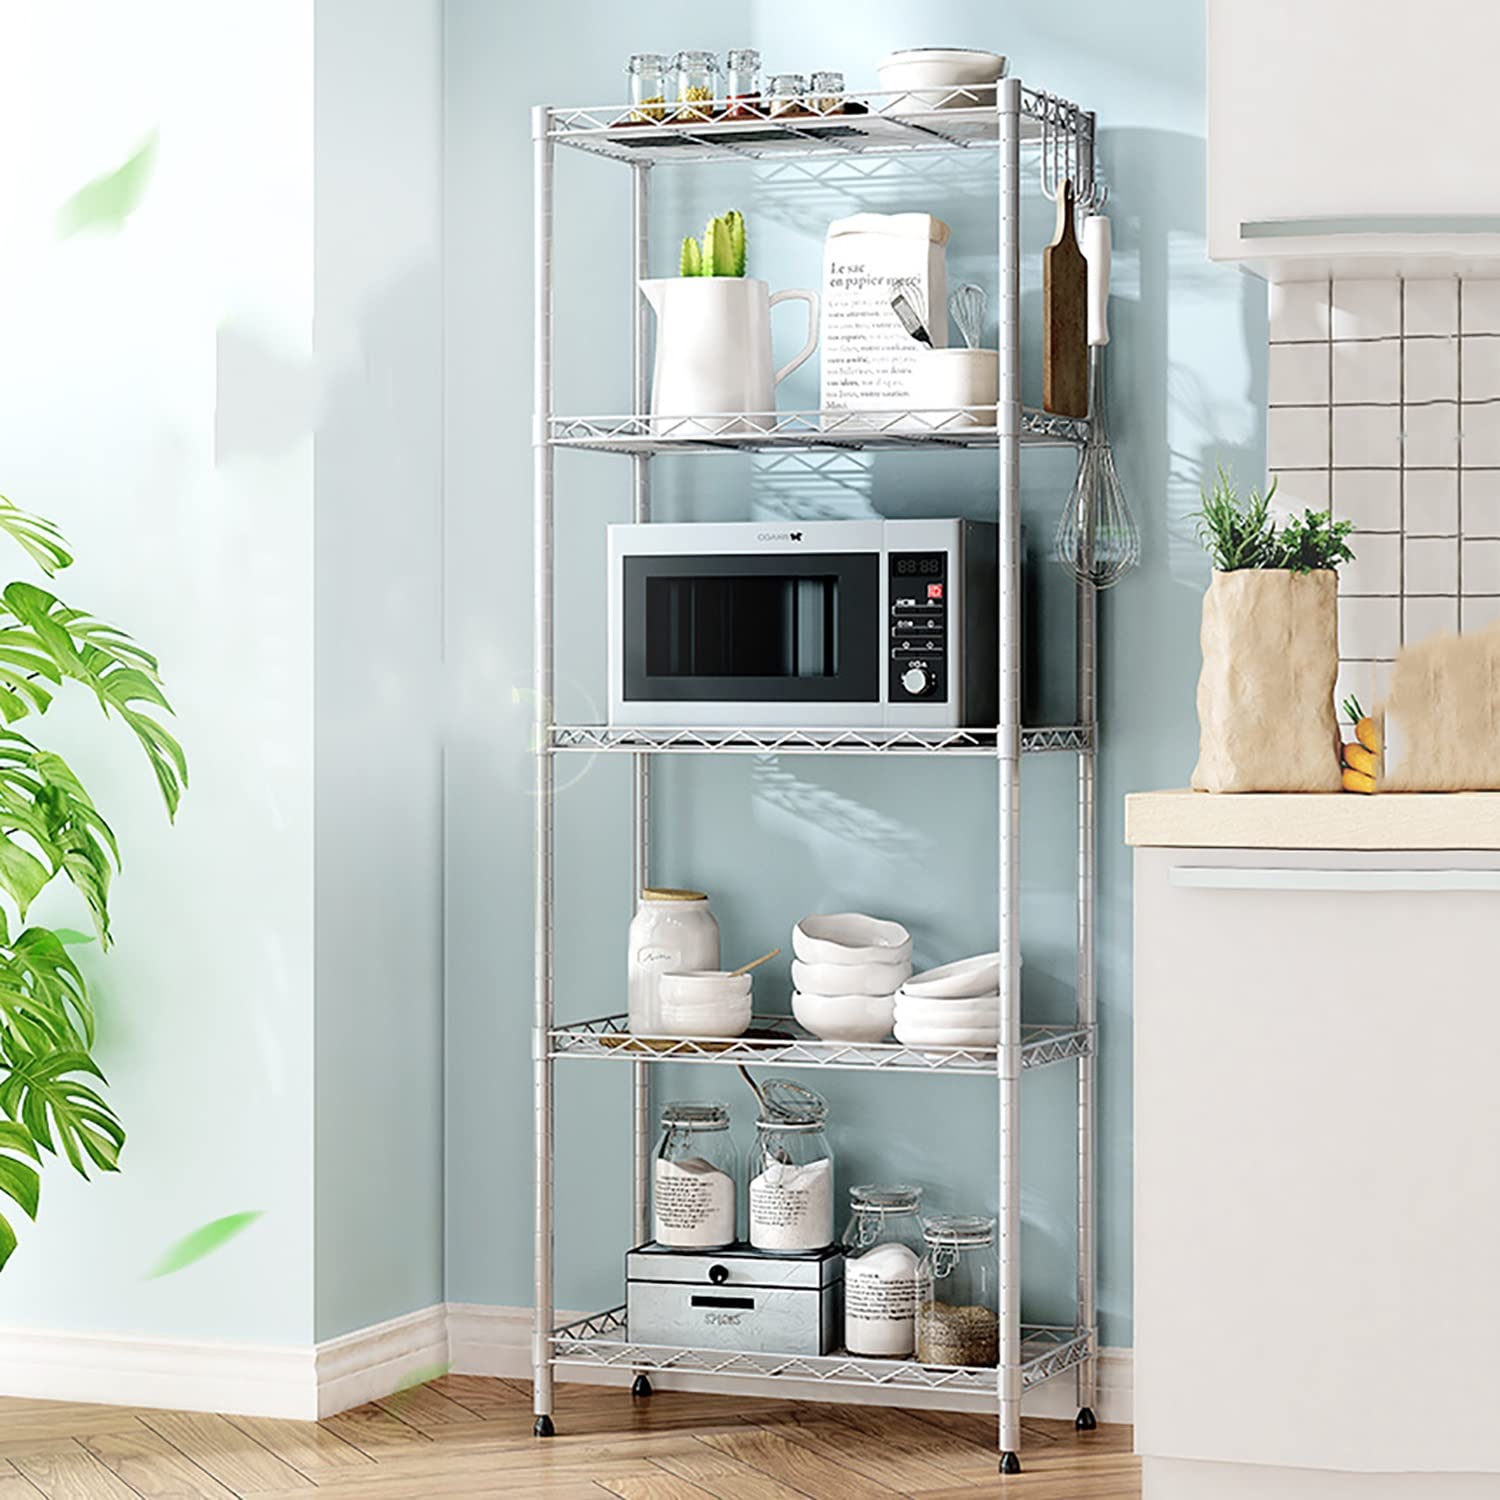 OMKUOSYA 5 Tier Storage Racks and Shelving - Heavy Duty Steel Pantry Shelves - Each Unit Loads 120 Pounds Wire Rack Shelf, Suitable for Kitchen, Bathroom, Closet, Warehouse - Silver